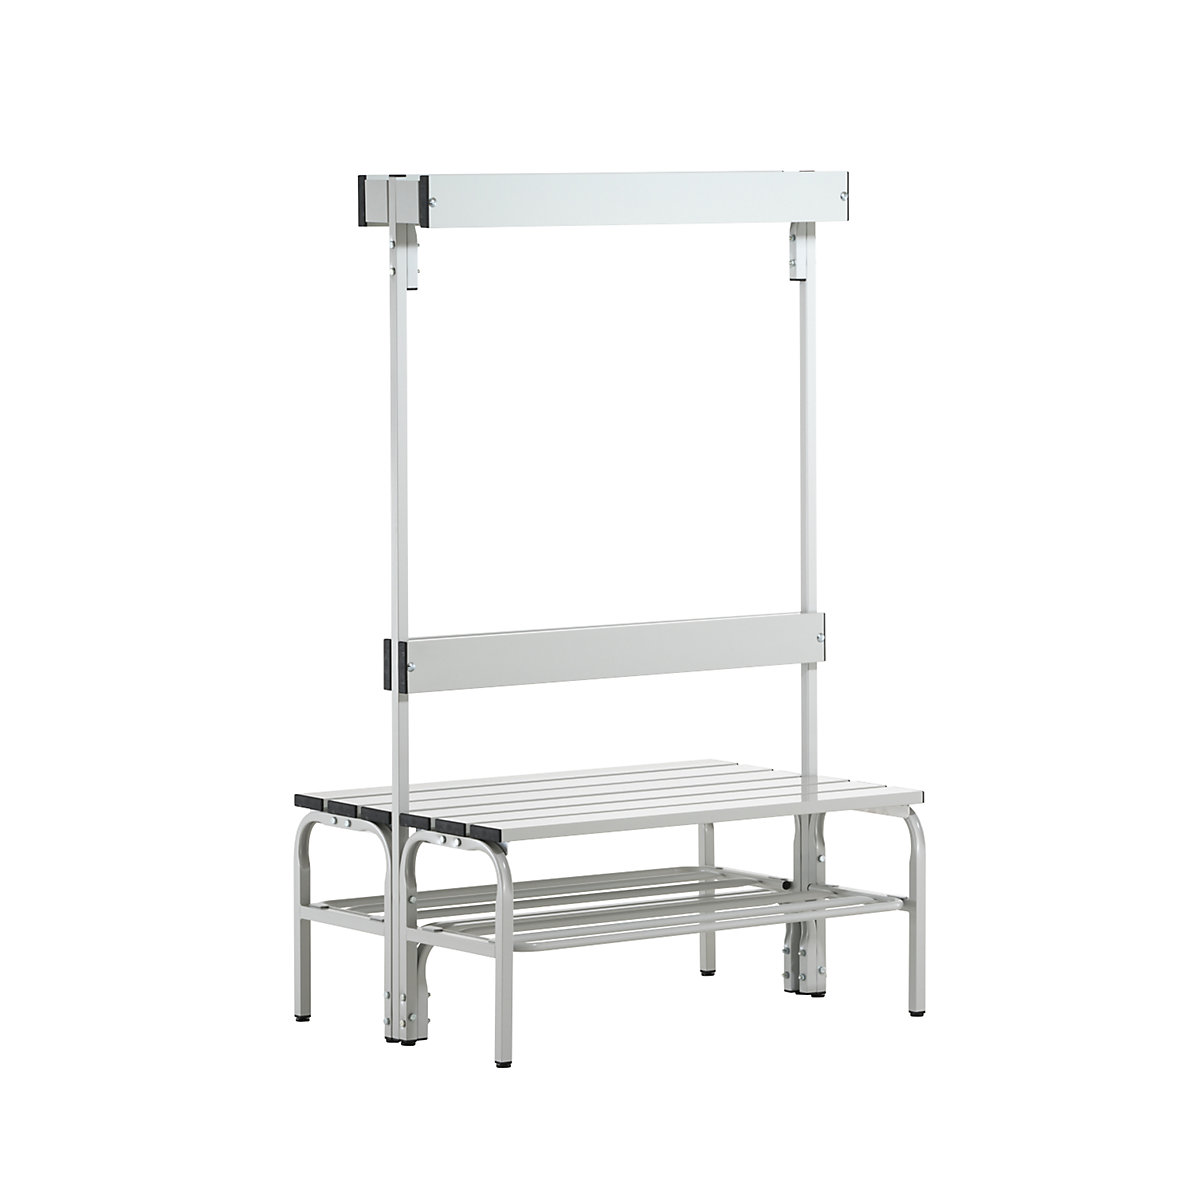 Sypro – Changing room bench made of stainless steel, HxD 1650 x 725 mm, length 1015 mm, 6 hooks, light grey, shoe rack